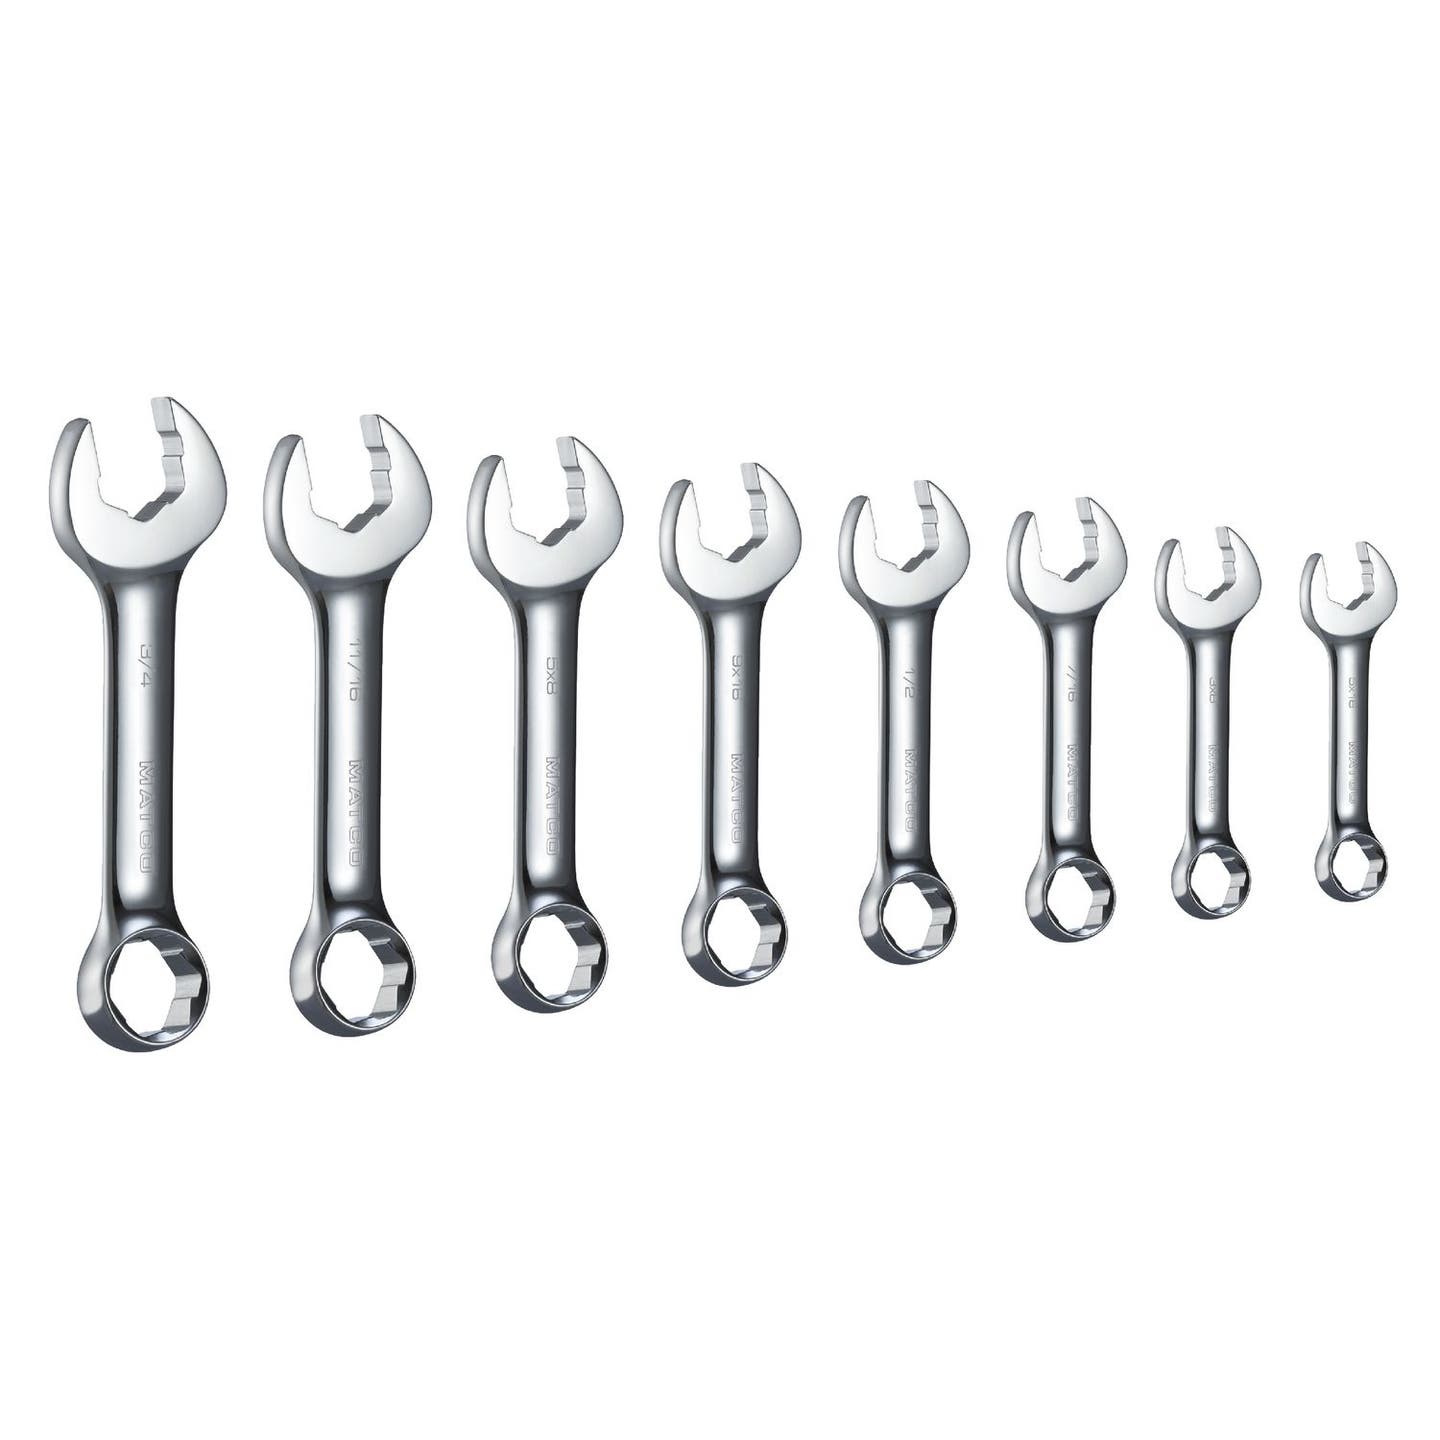 8 PIECE STUBBY SAE HEX GRIP WRENCH SET